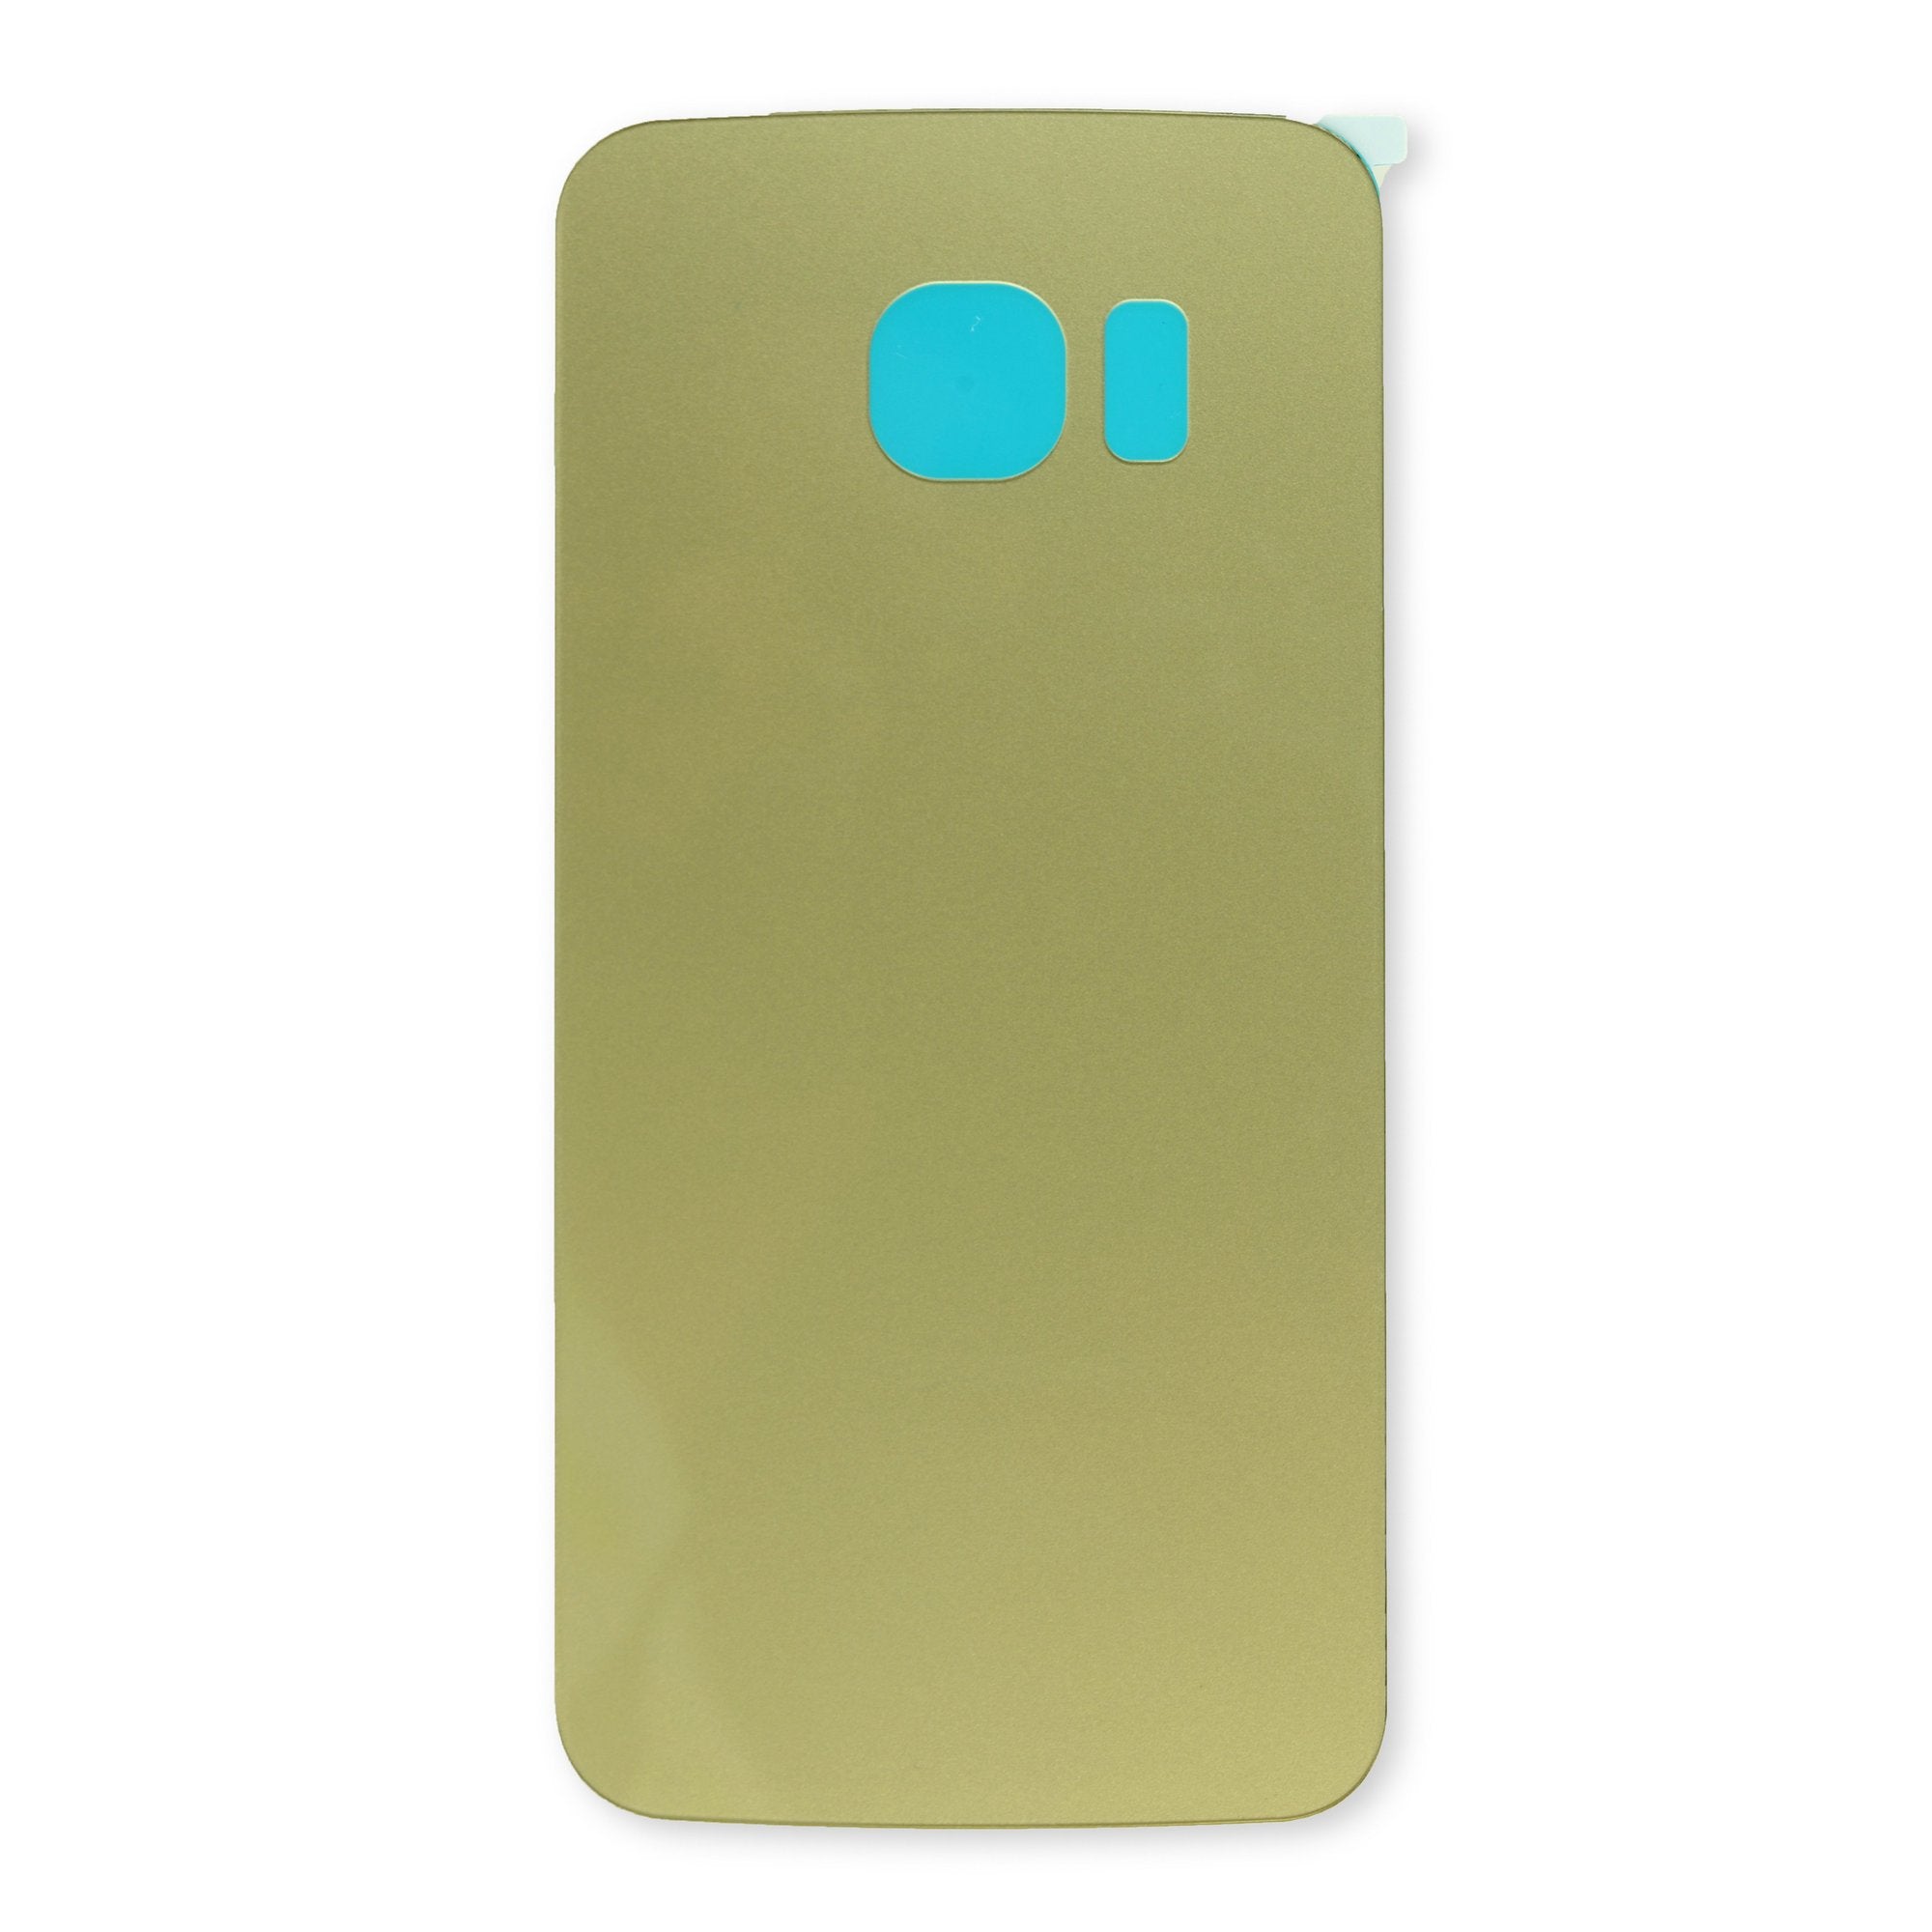 Galaxy S6 Edge Rear Panel/Cover Gold New